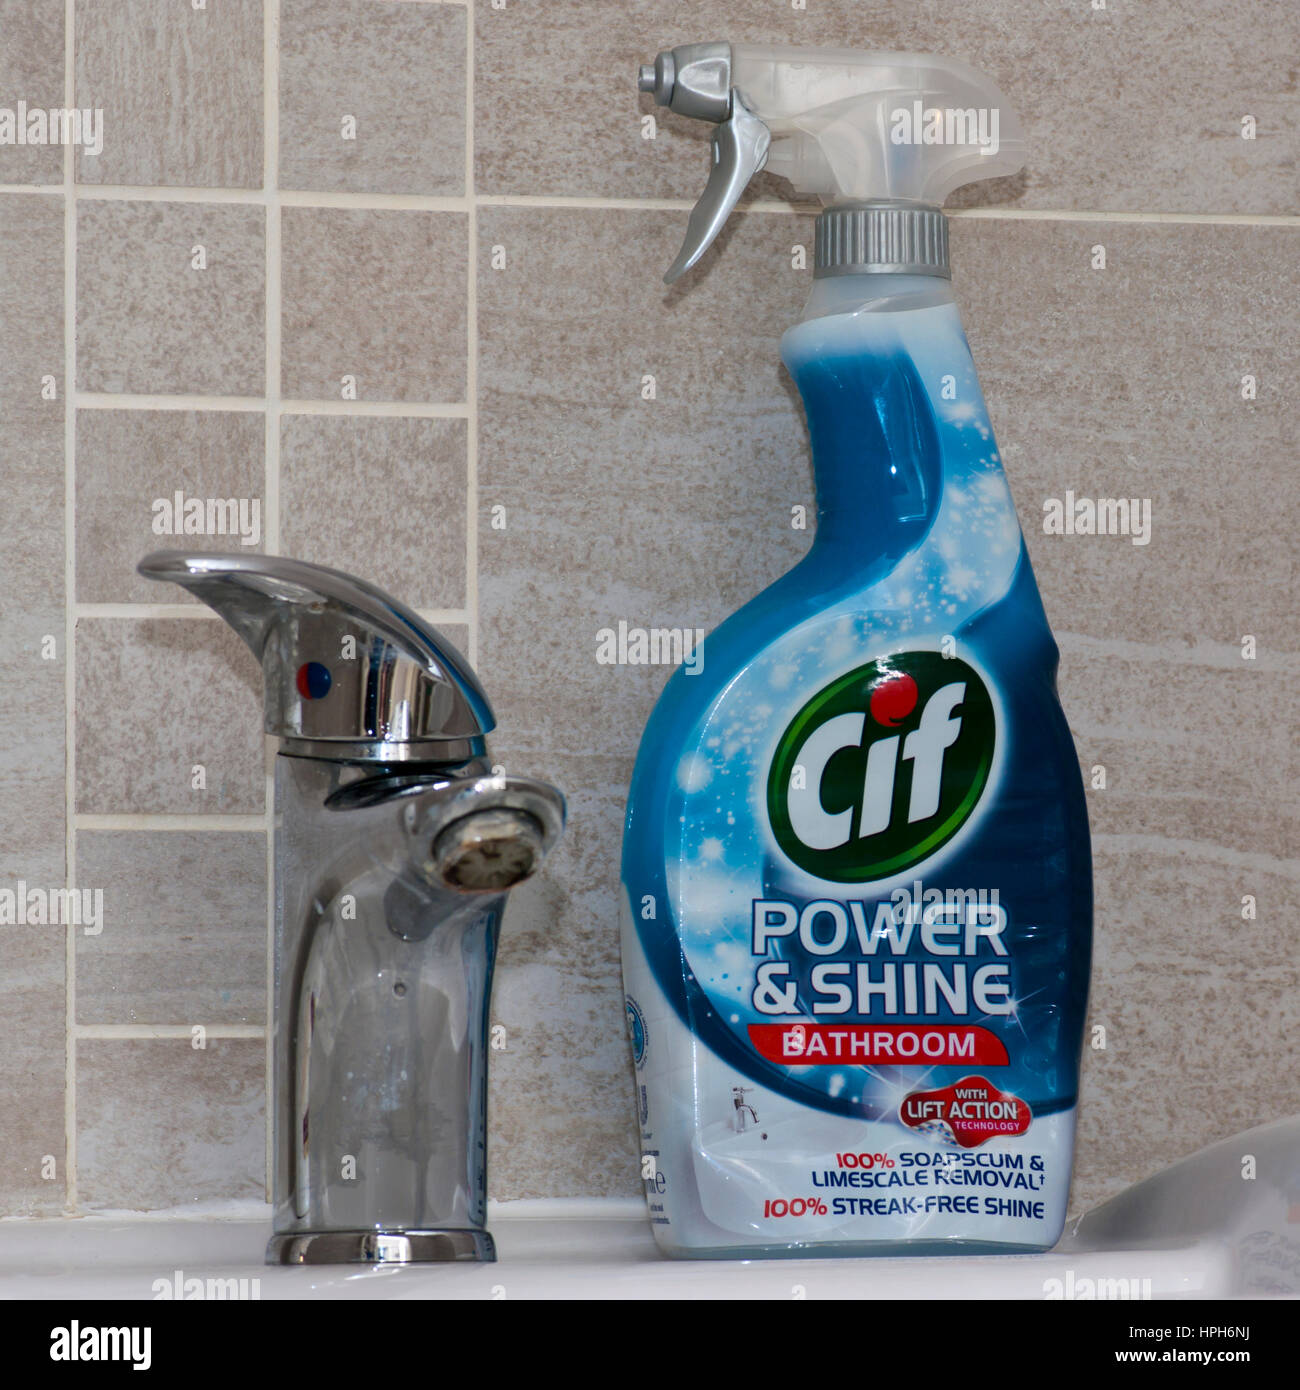 Cif Power and Shine Bathroom Cleaner Stock Photo